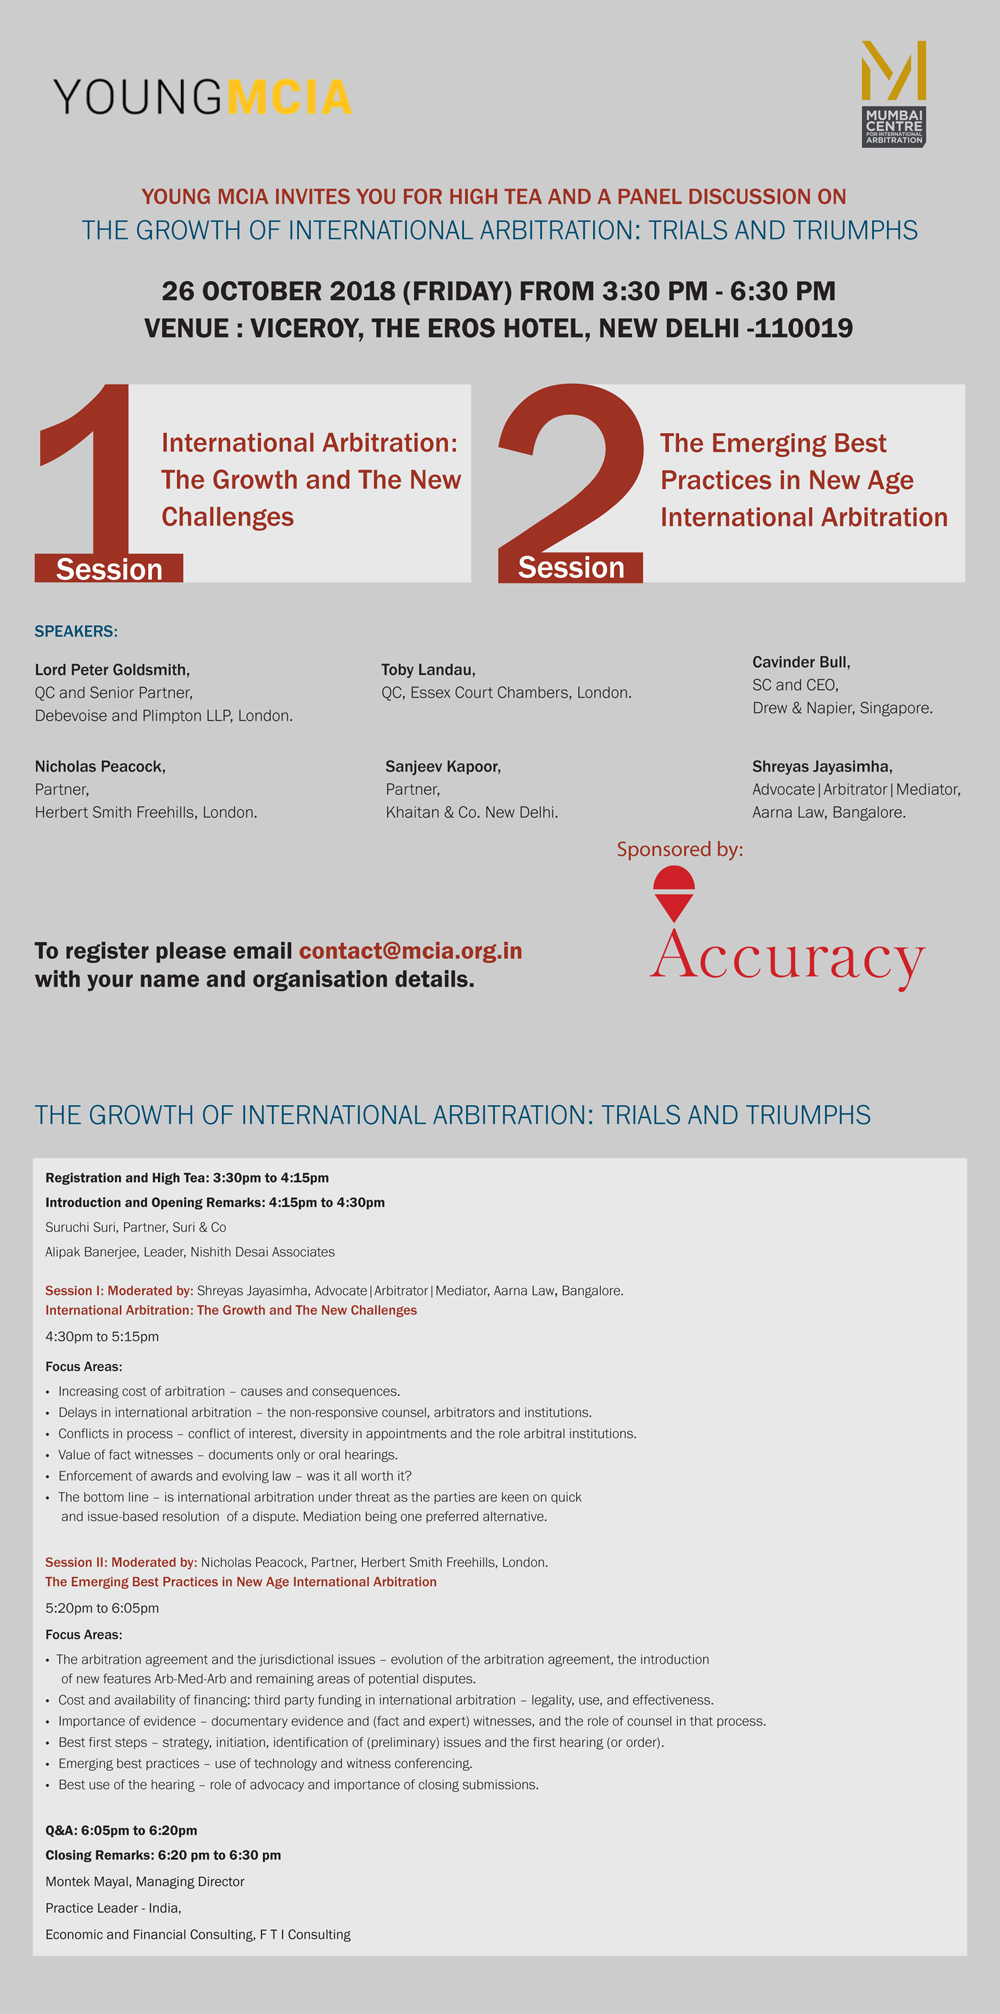 THE GROWTH OF INTERNATIONAL ARBITRATION: TRIALS AND TRIUMPHS